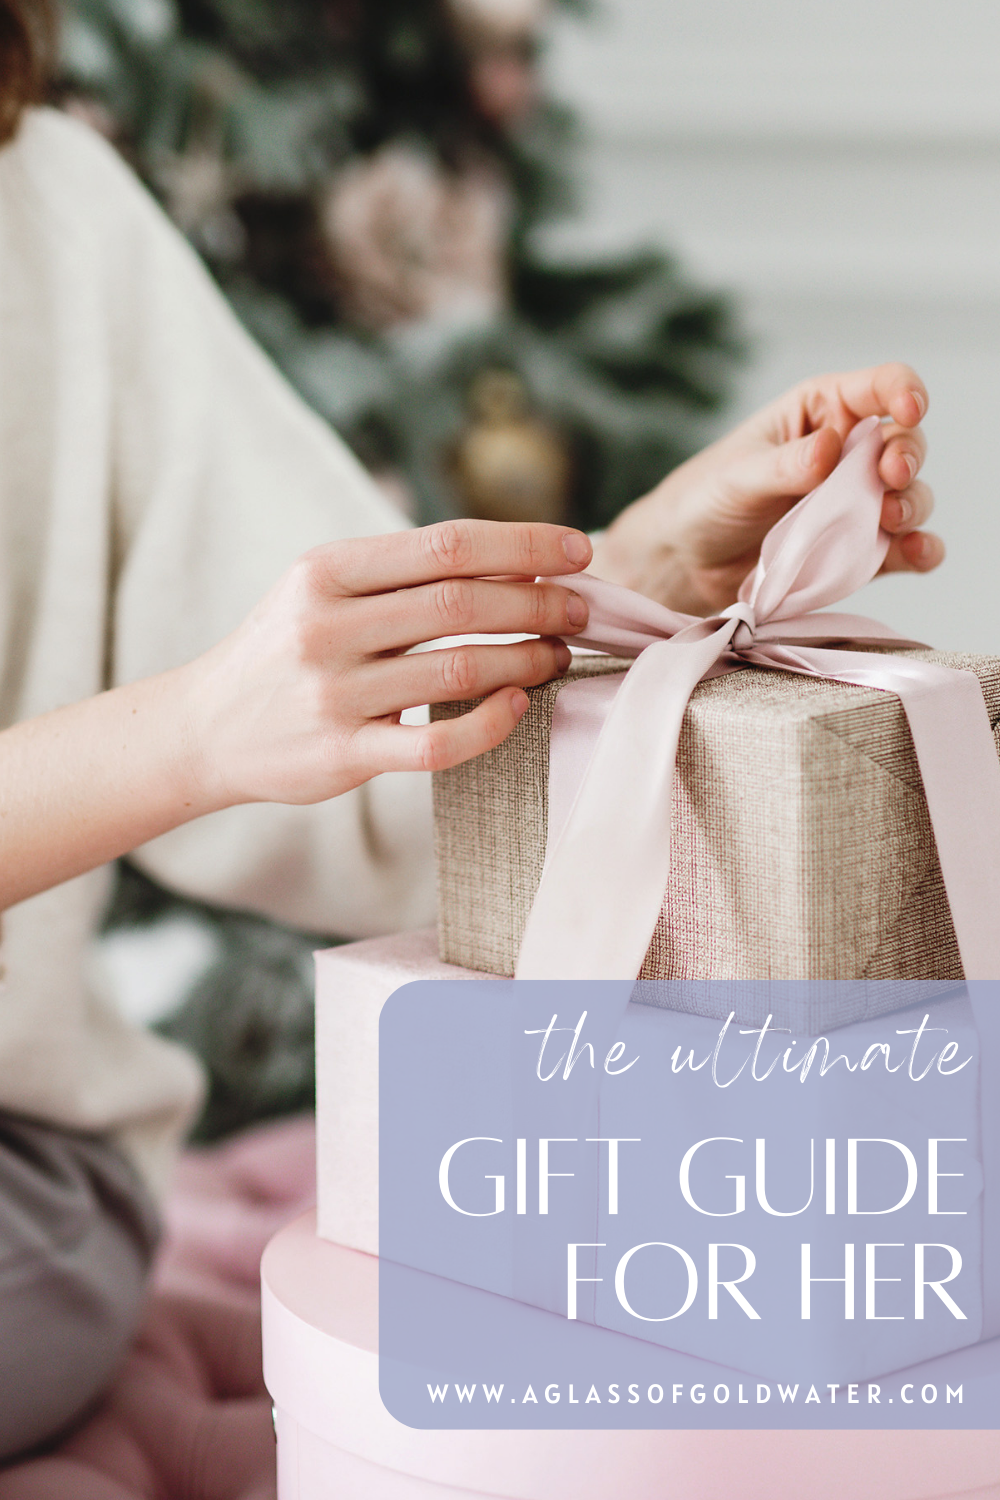 The Ultimate Gift Guide for Her